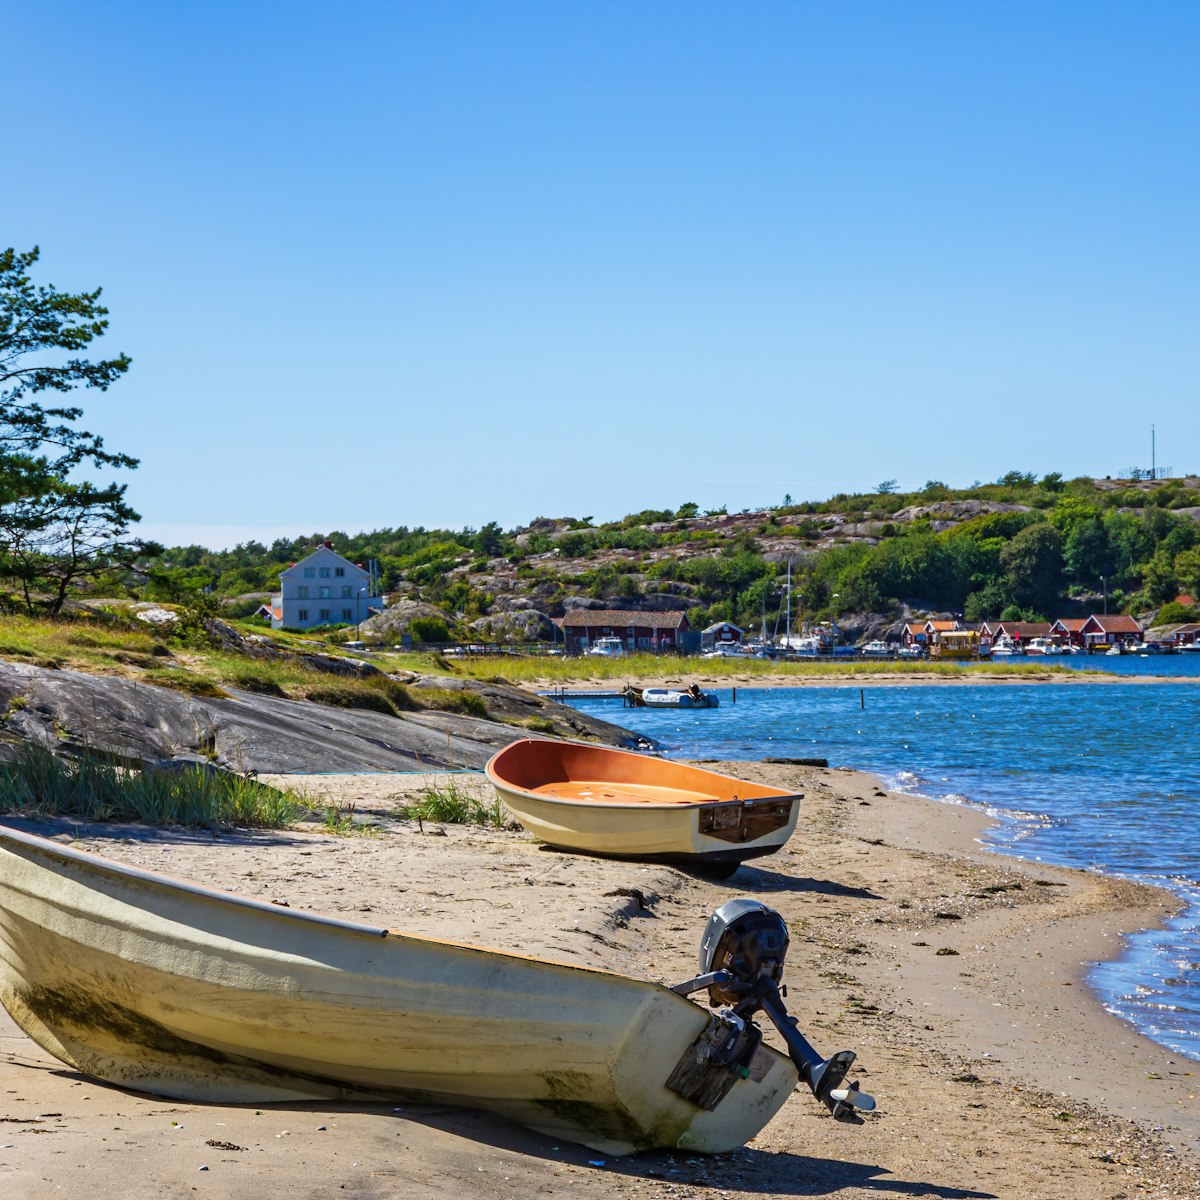 Two boats lie ashore on the North shore of South Koster Island (Sydkoster) with a view of the North Koster Island (Nordkoster) in Sweden.